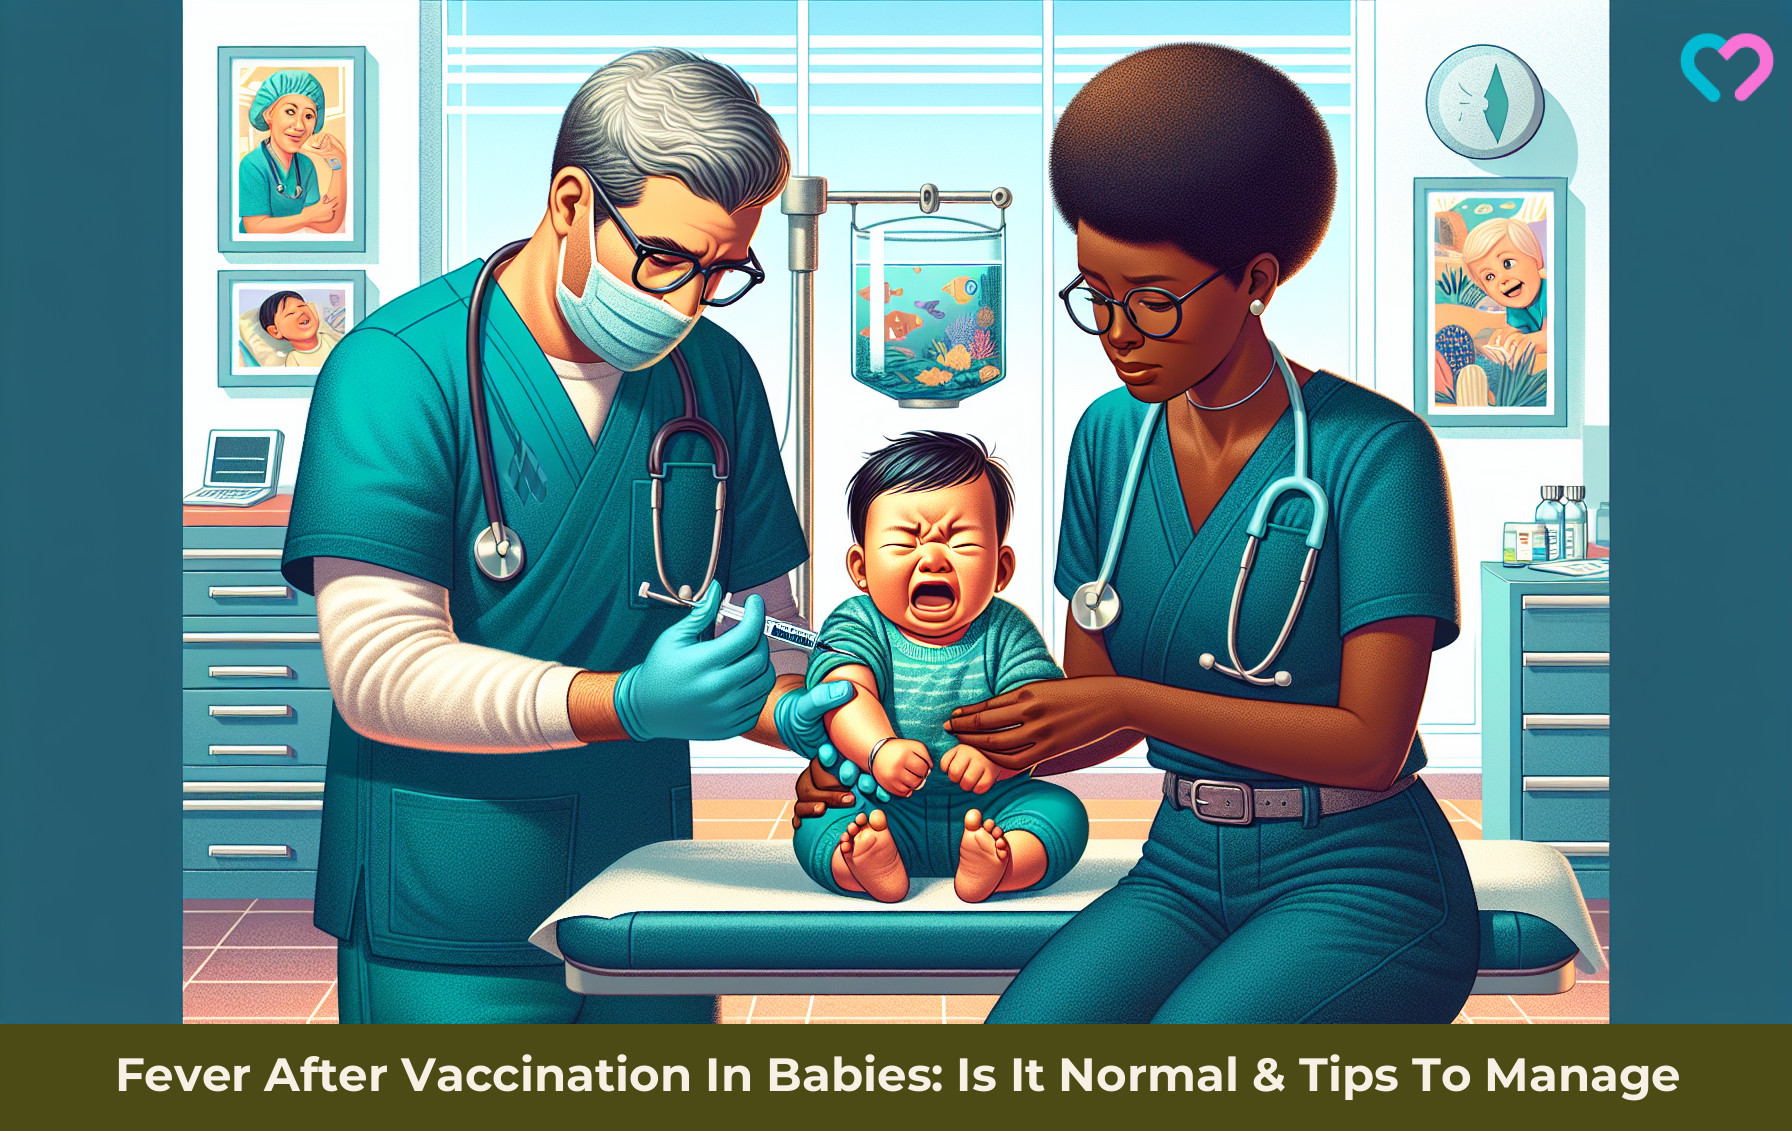 Fever After Vaccination In Babies_illustration